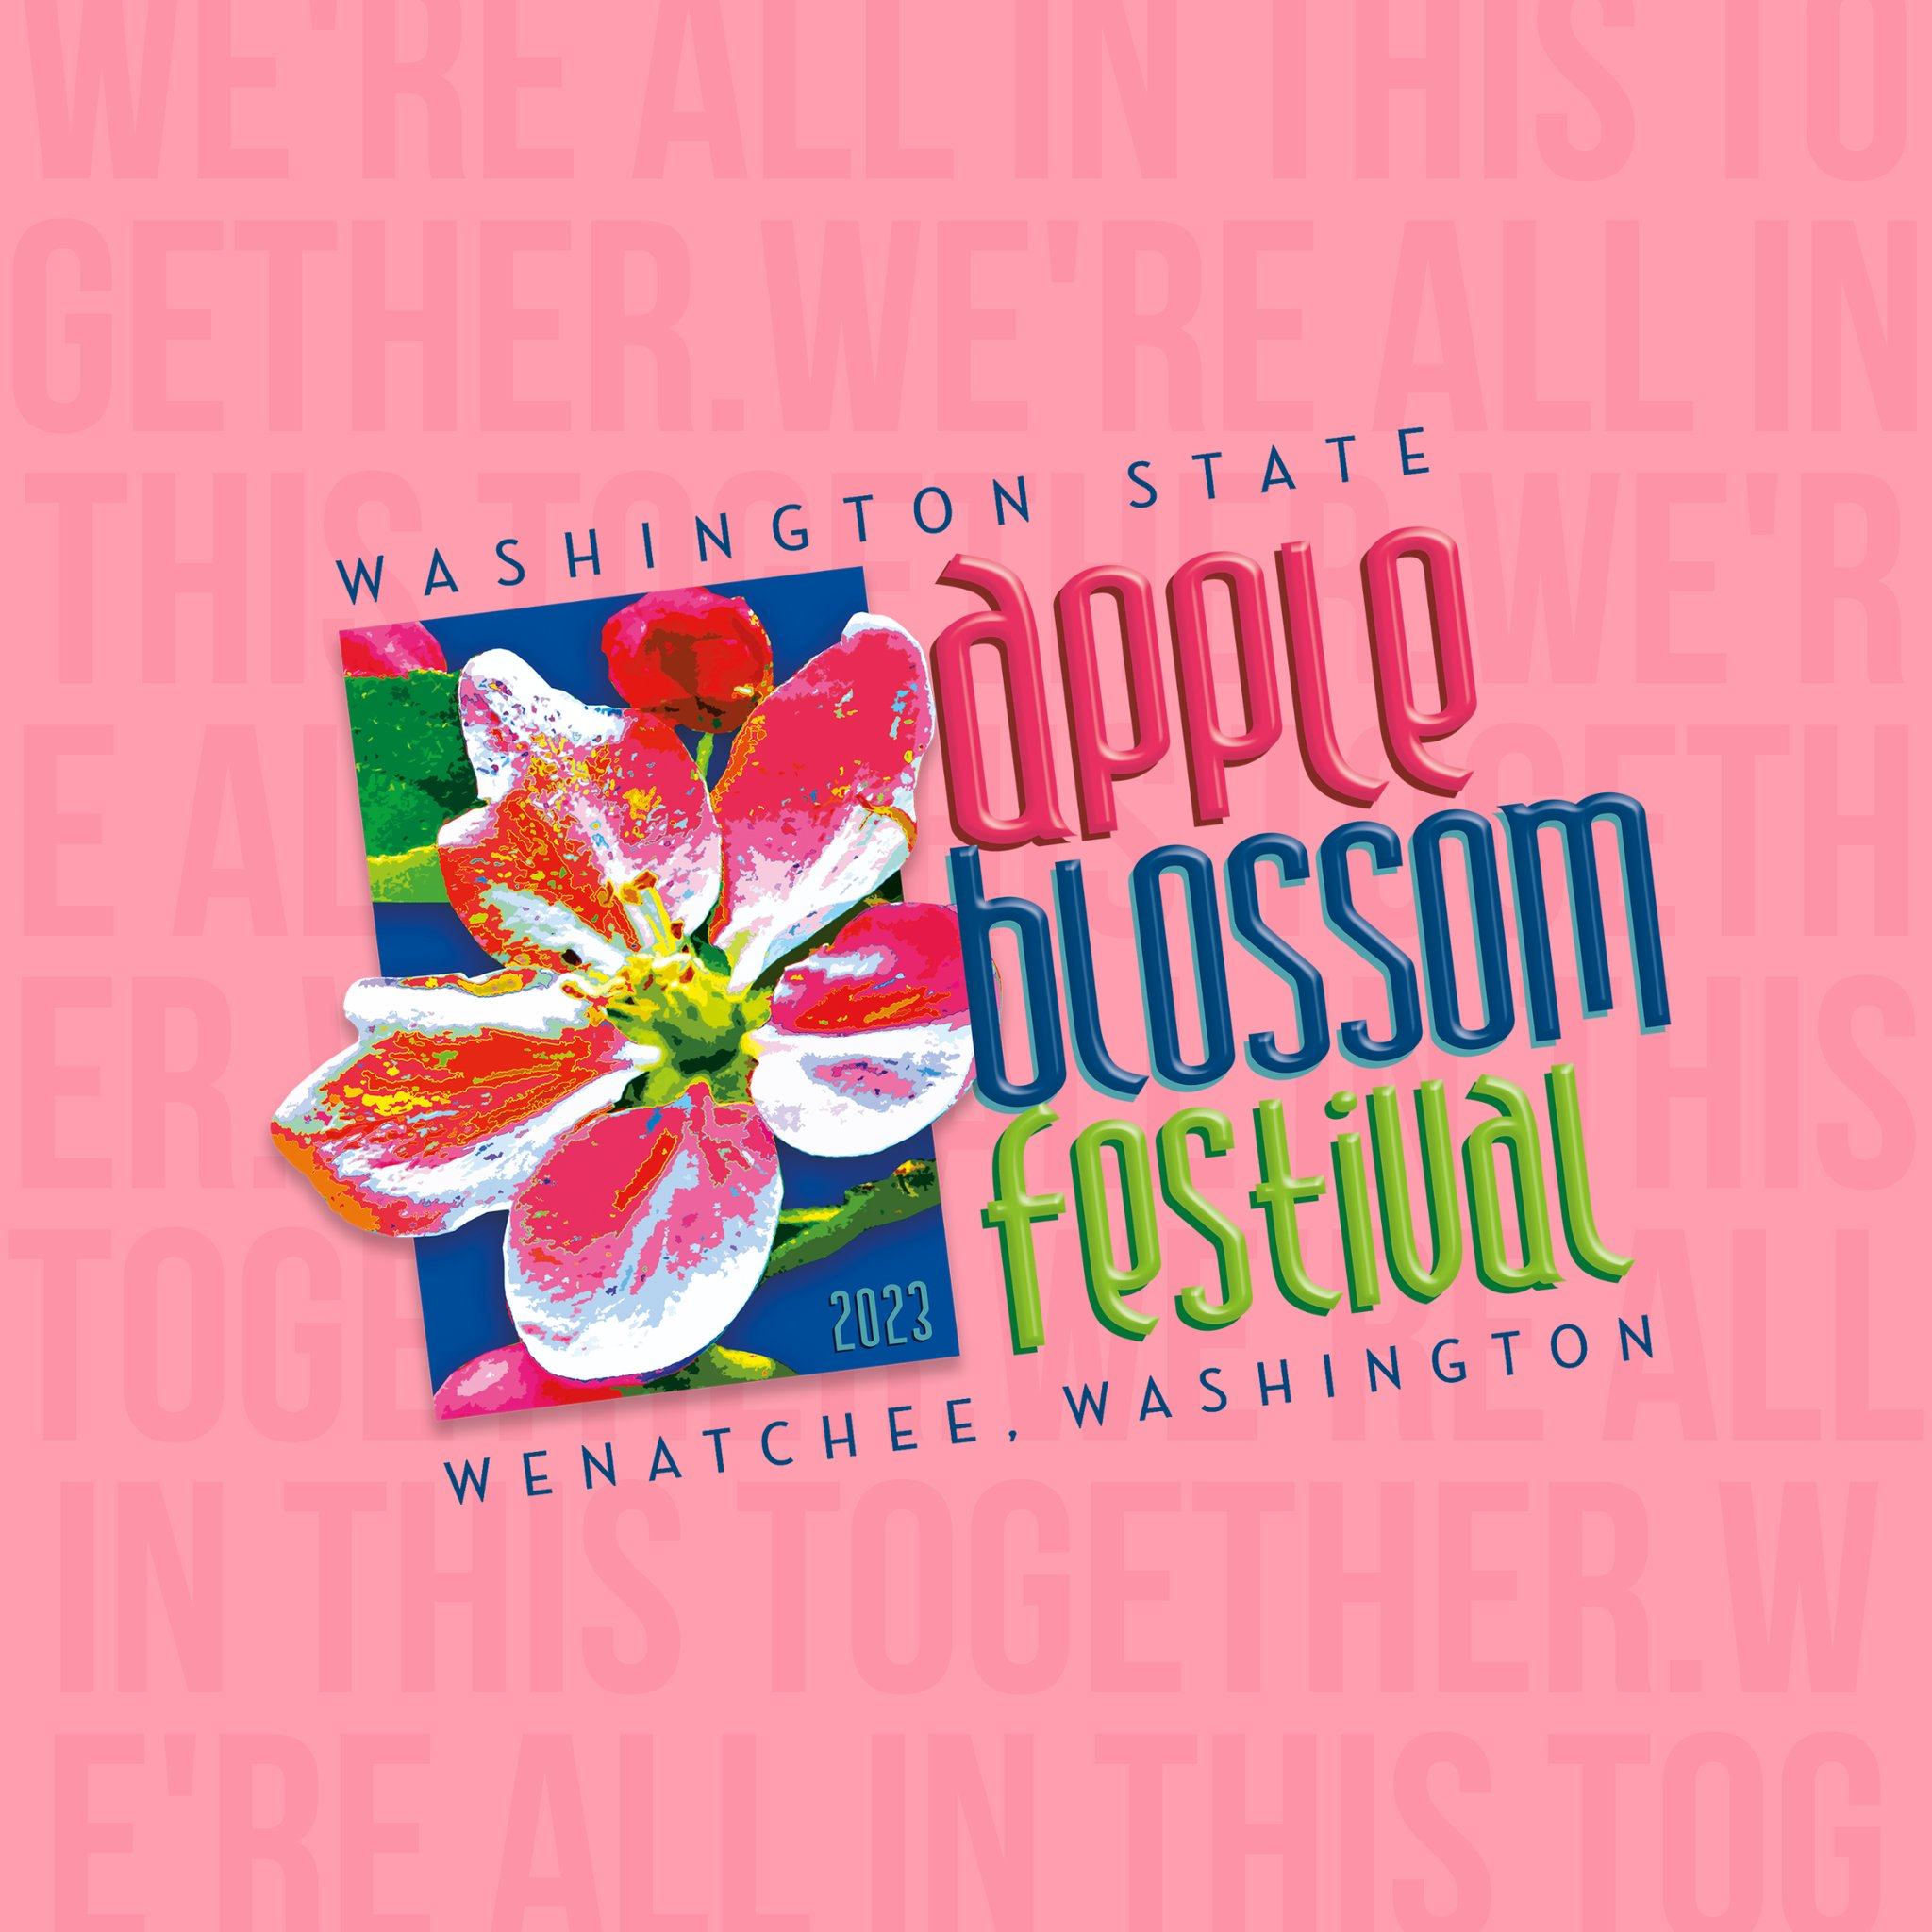 <h1 class="tribe-events-single-event-title">Apple Blossom Festival 2023</h1>